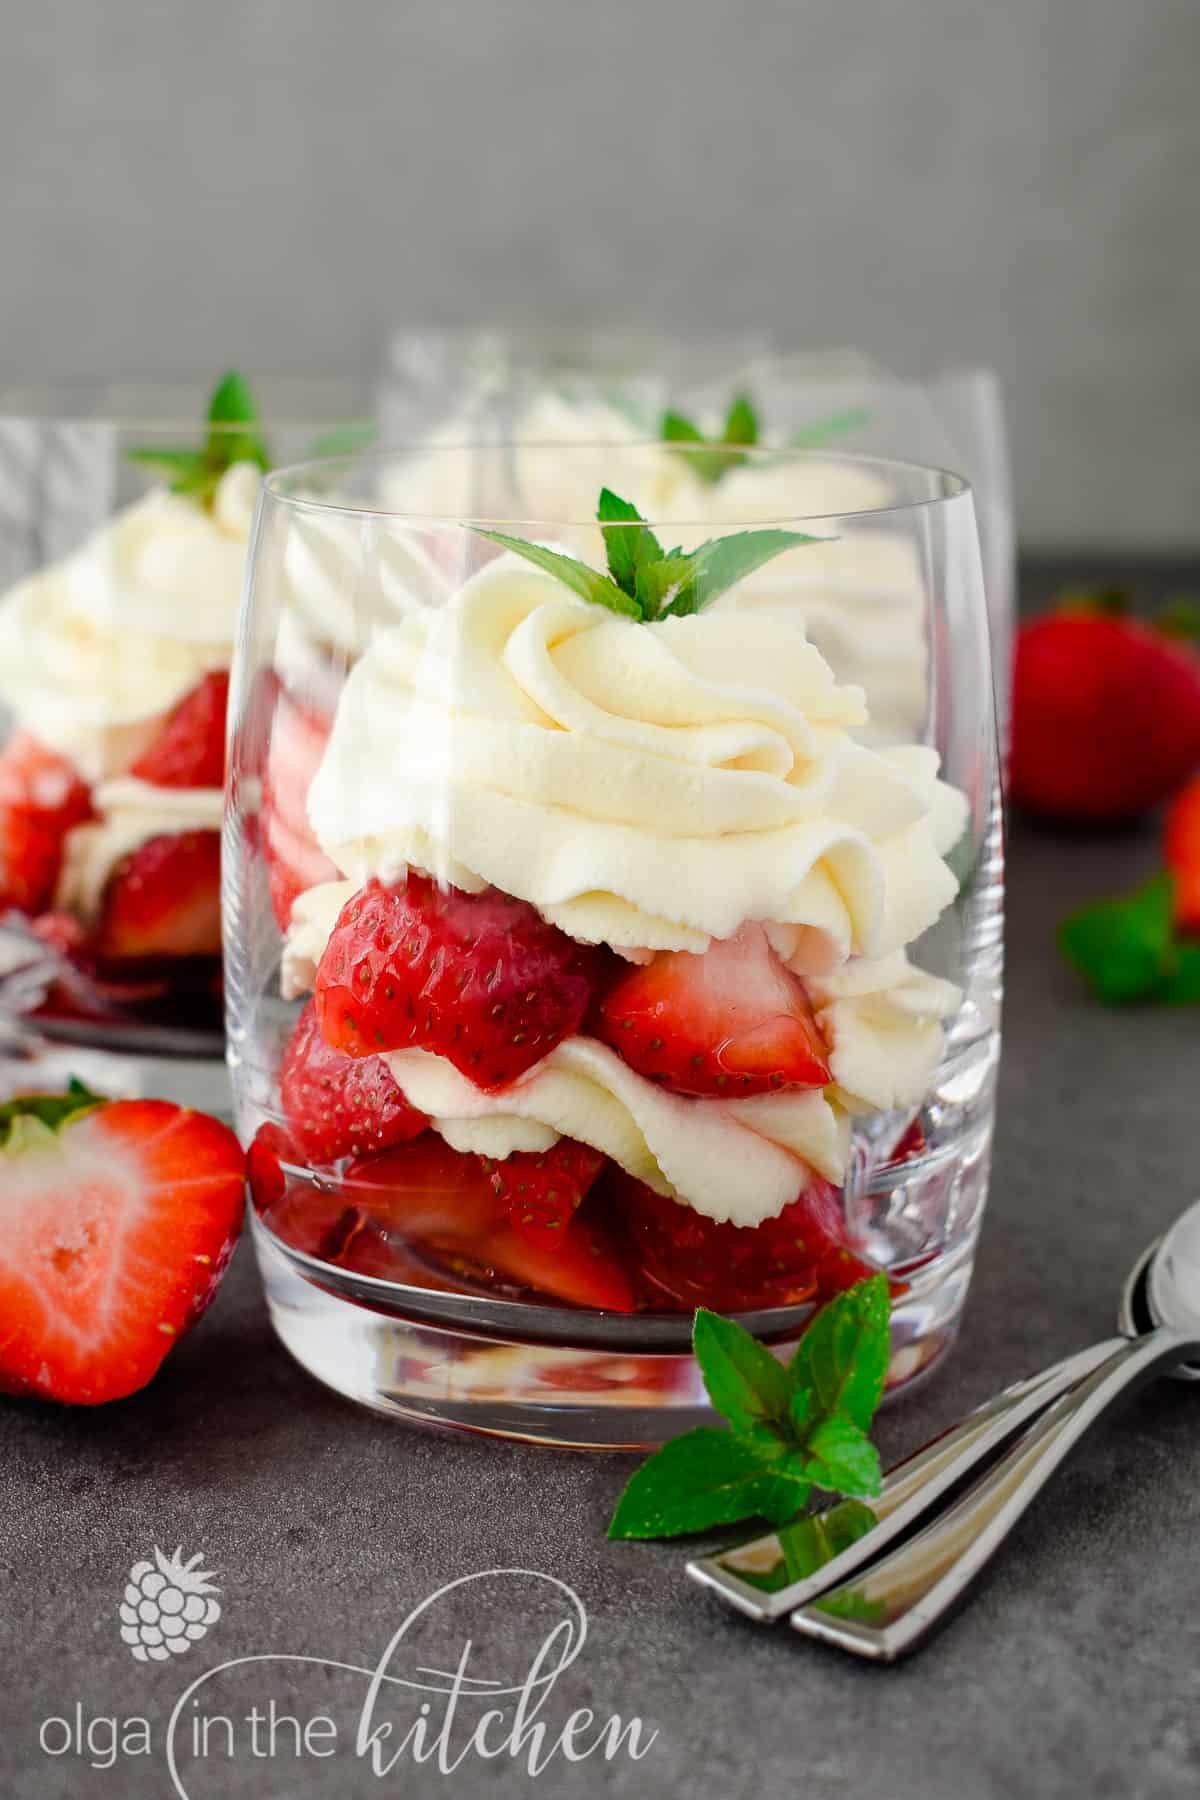 Strawberries and Cream Dessert: sugared fresh strawberries and a vanilla-flavored sweetened whipped cream make up this easy and delicious no-bake dessert the perfect treat for summer days. The perfect dessert for summer parties! olgainthekitchen.com